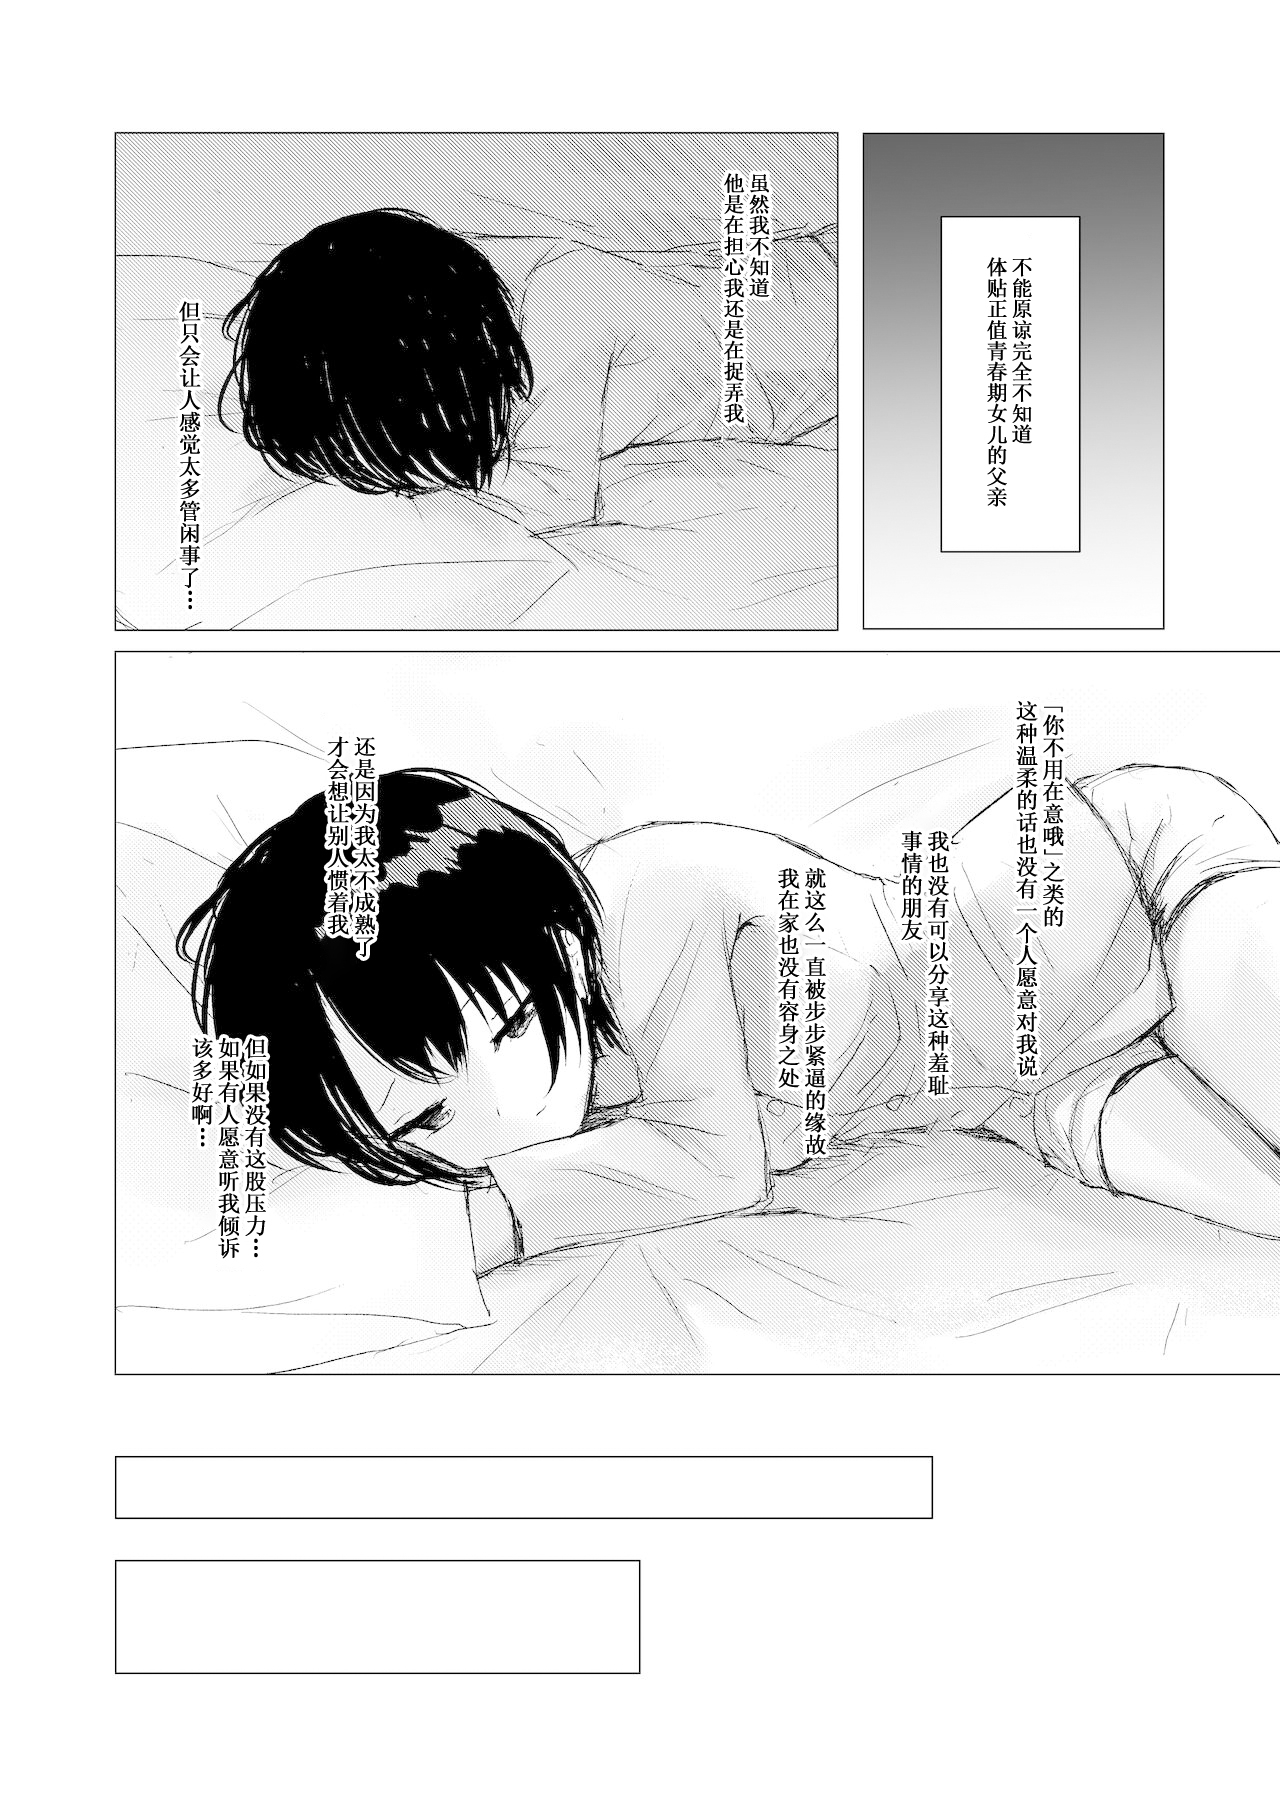 [Happiness (Isoi)] Kendo Shoujo no Complex [Chinese] [白杨汉化组] 11